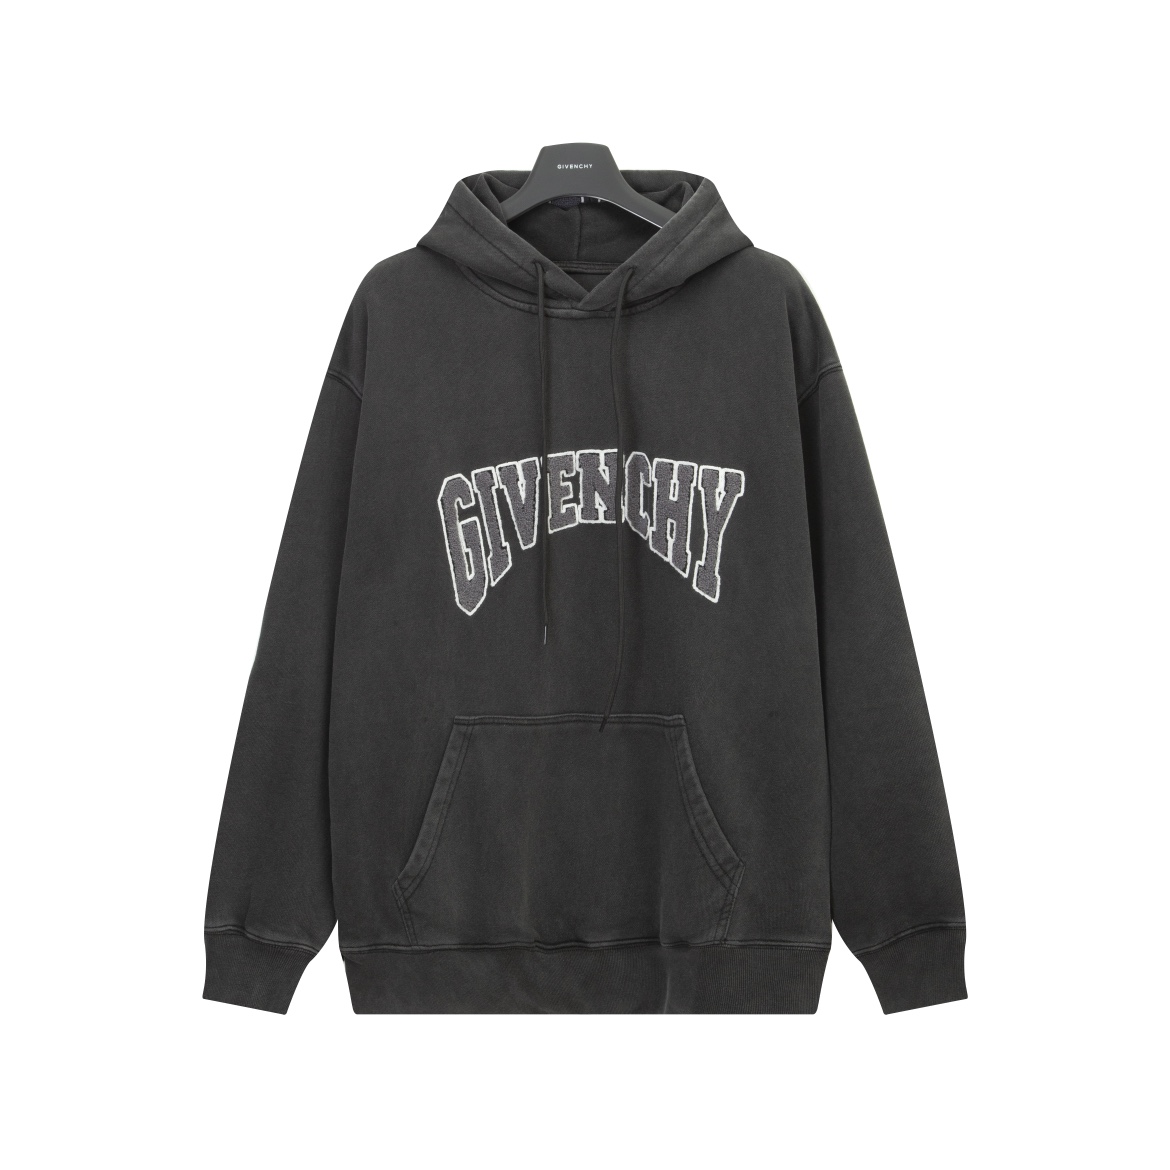 How to find replica Shop
 Givenchy Clothing Hoodies 2023 Replica Wholesale Cheap Sales Online
 Black White Embroidery Cotton Hooded Top